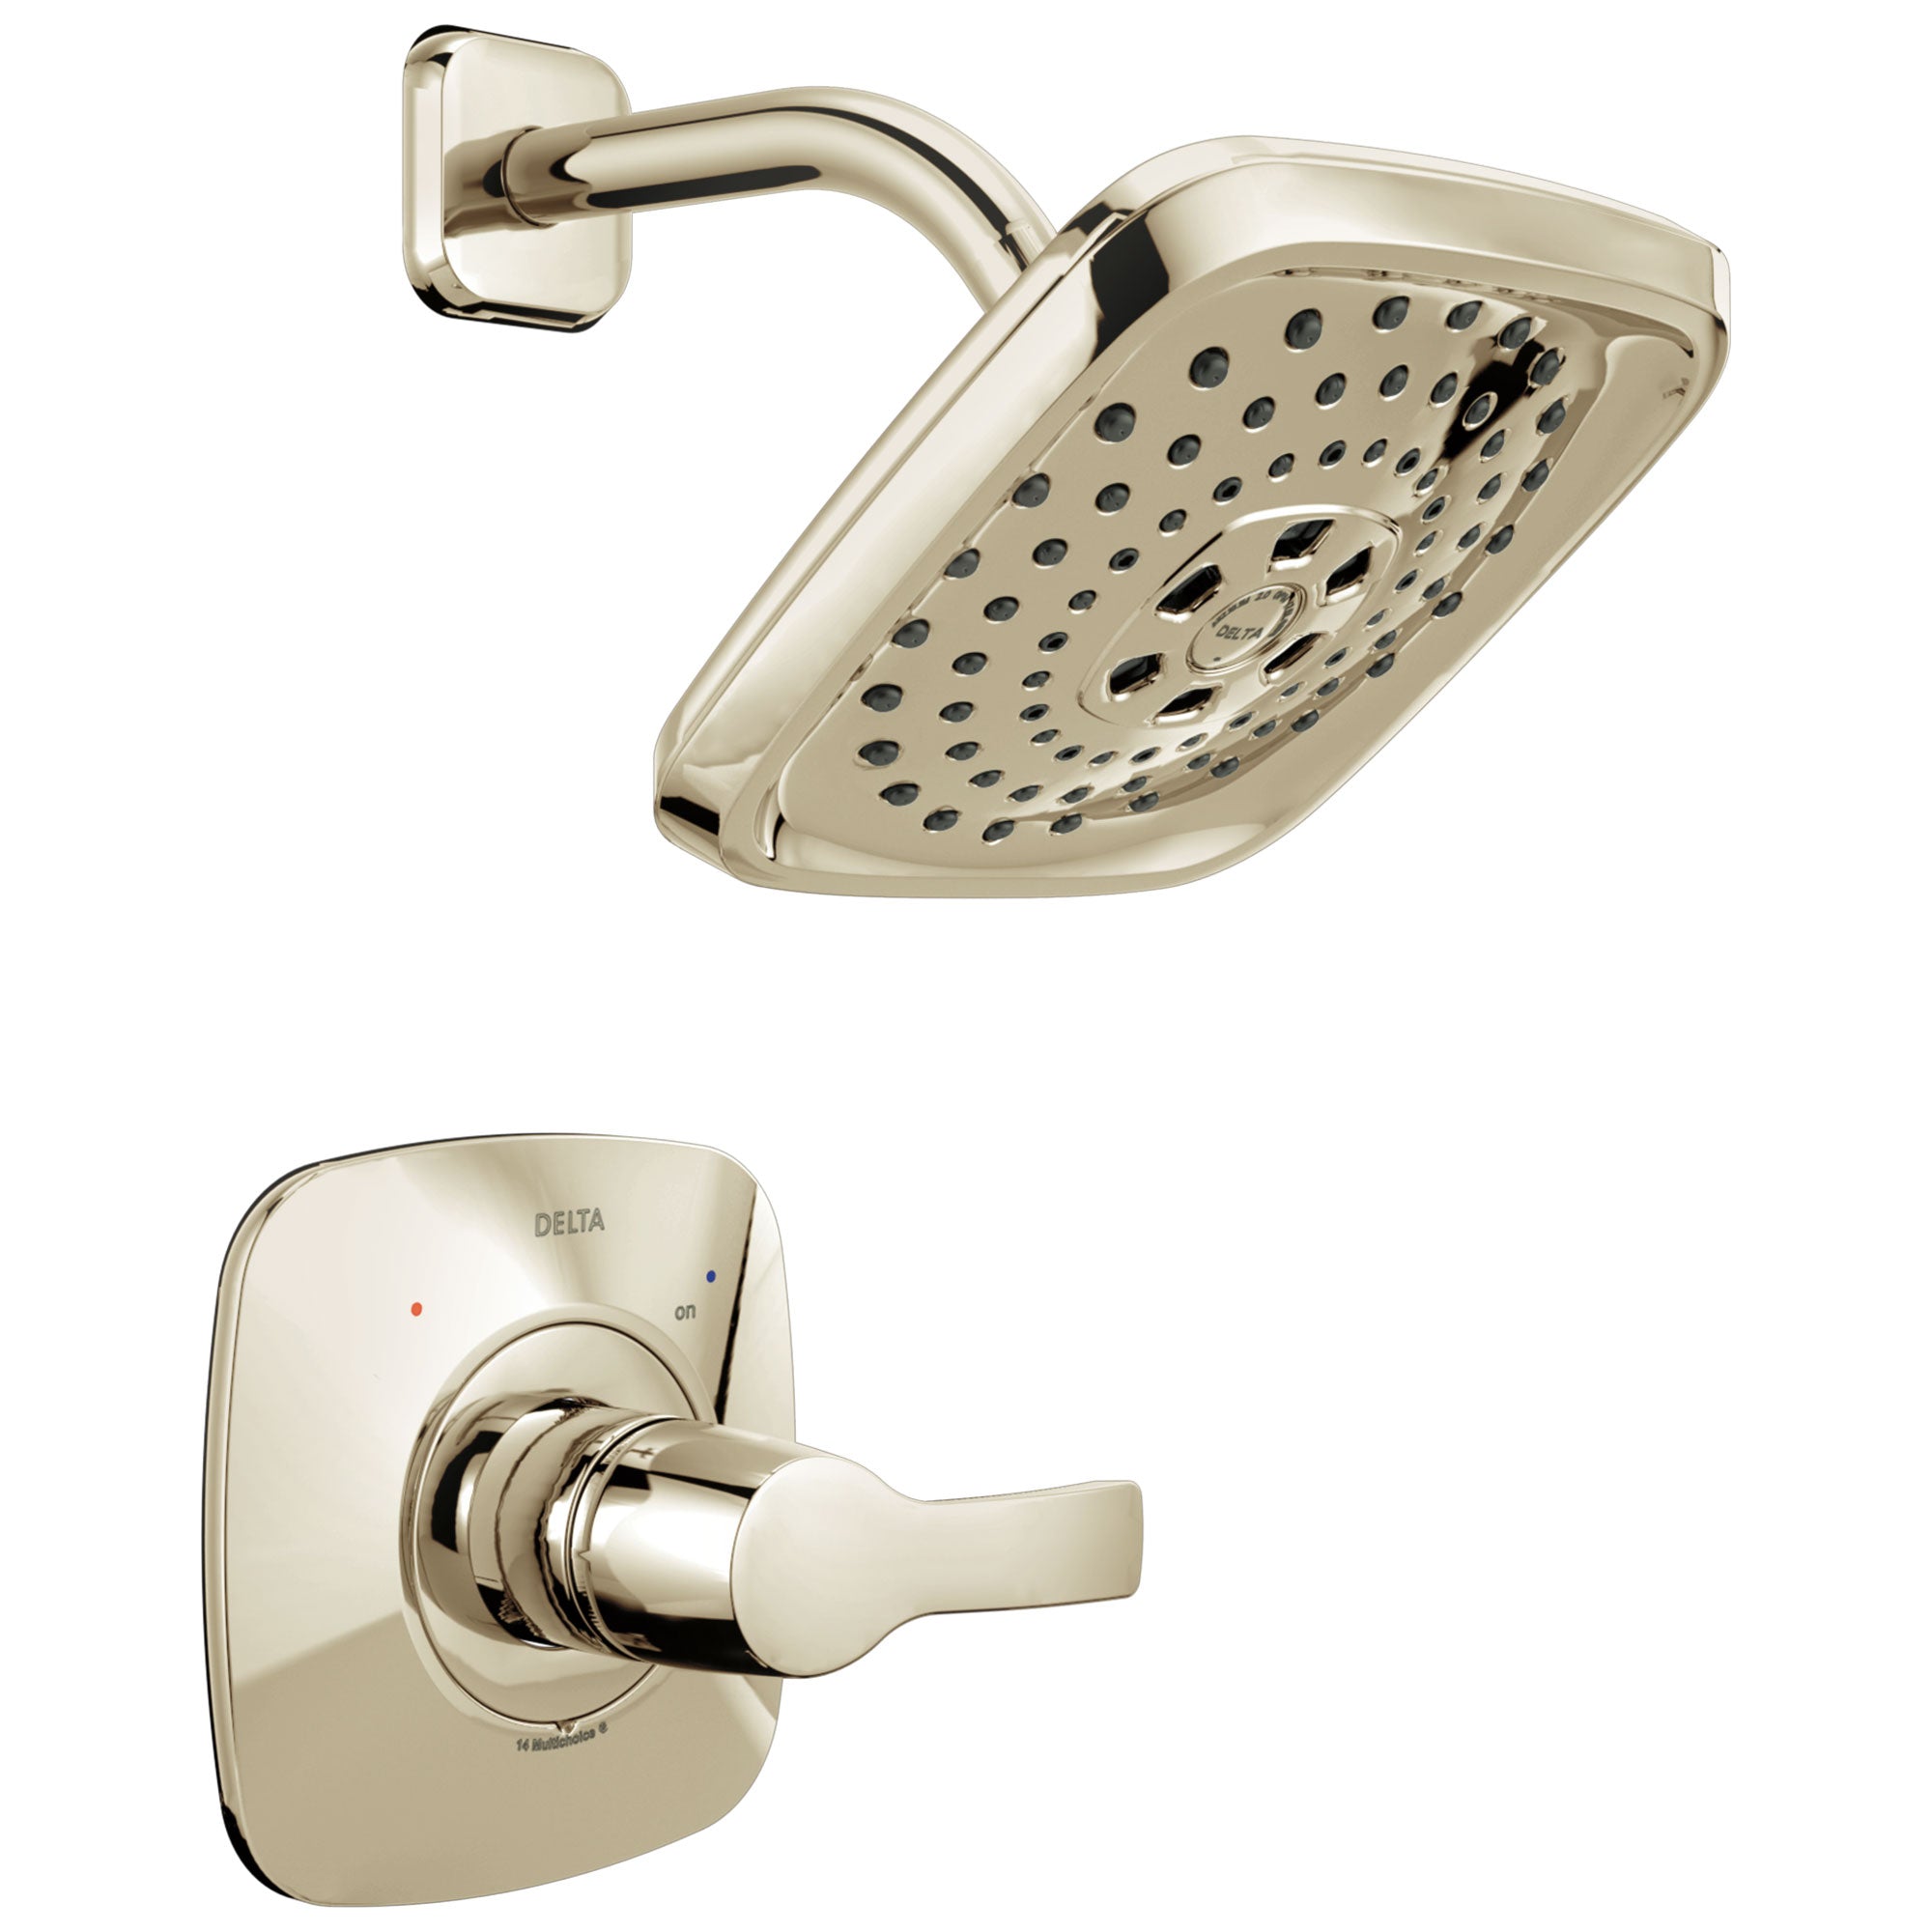 Delta Tesla H2Okinetic 1-Handle Shower Faucet in Polished Nickel Includes Rough-in Valve without Stops D2586V